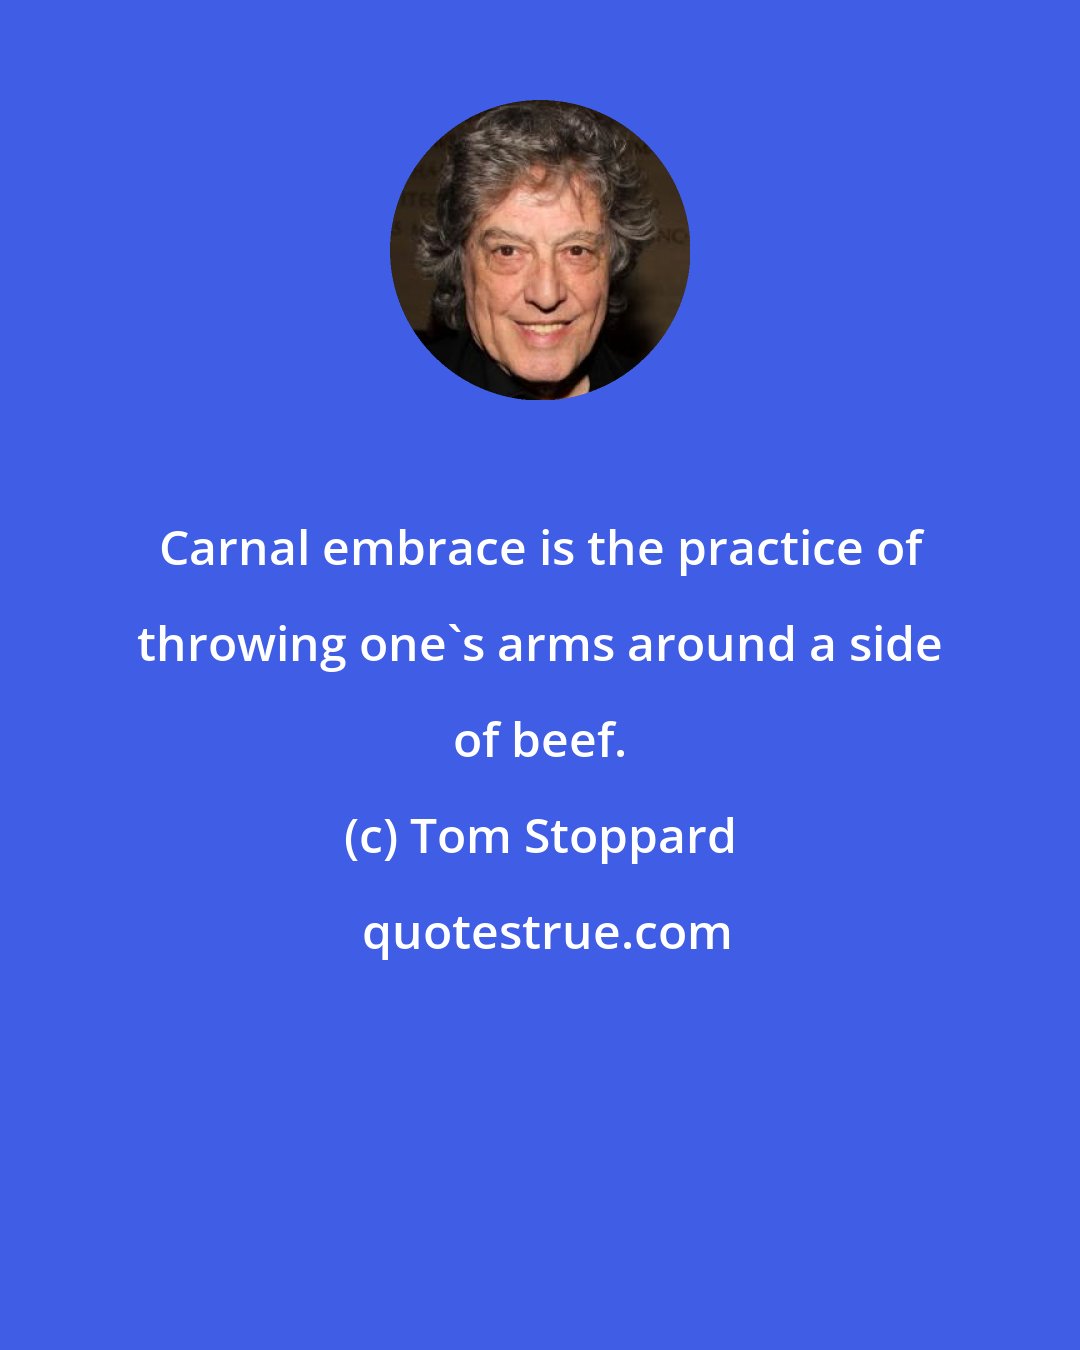 Tom Stoppard: Carnal embrace is the practice of throwing one's arms around a side of beef.